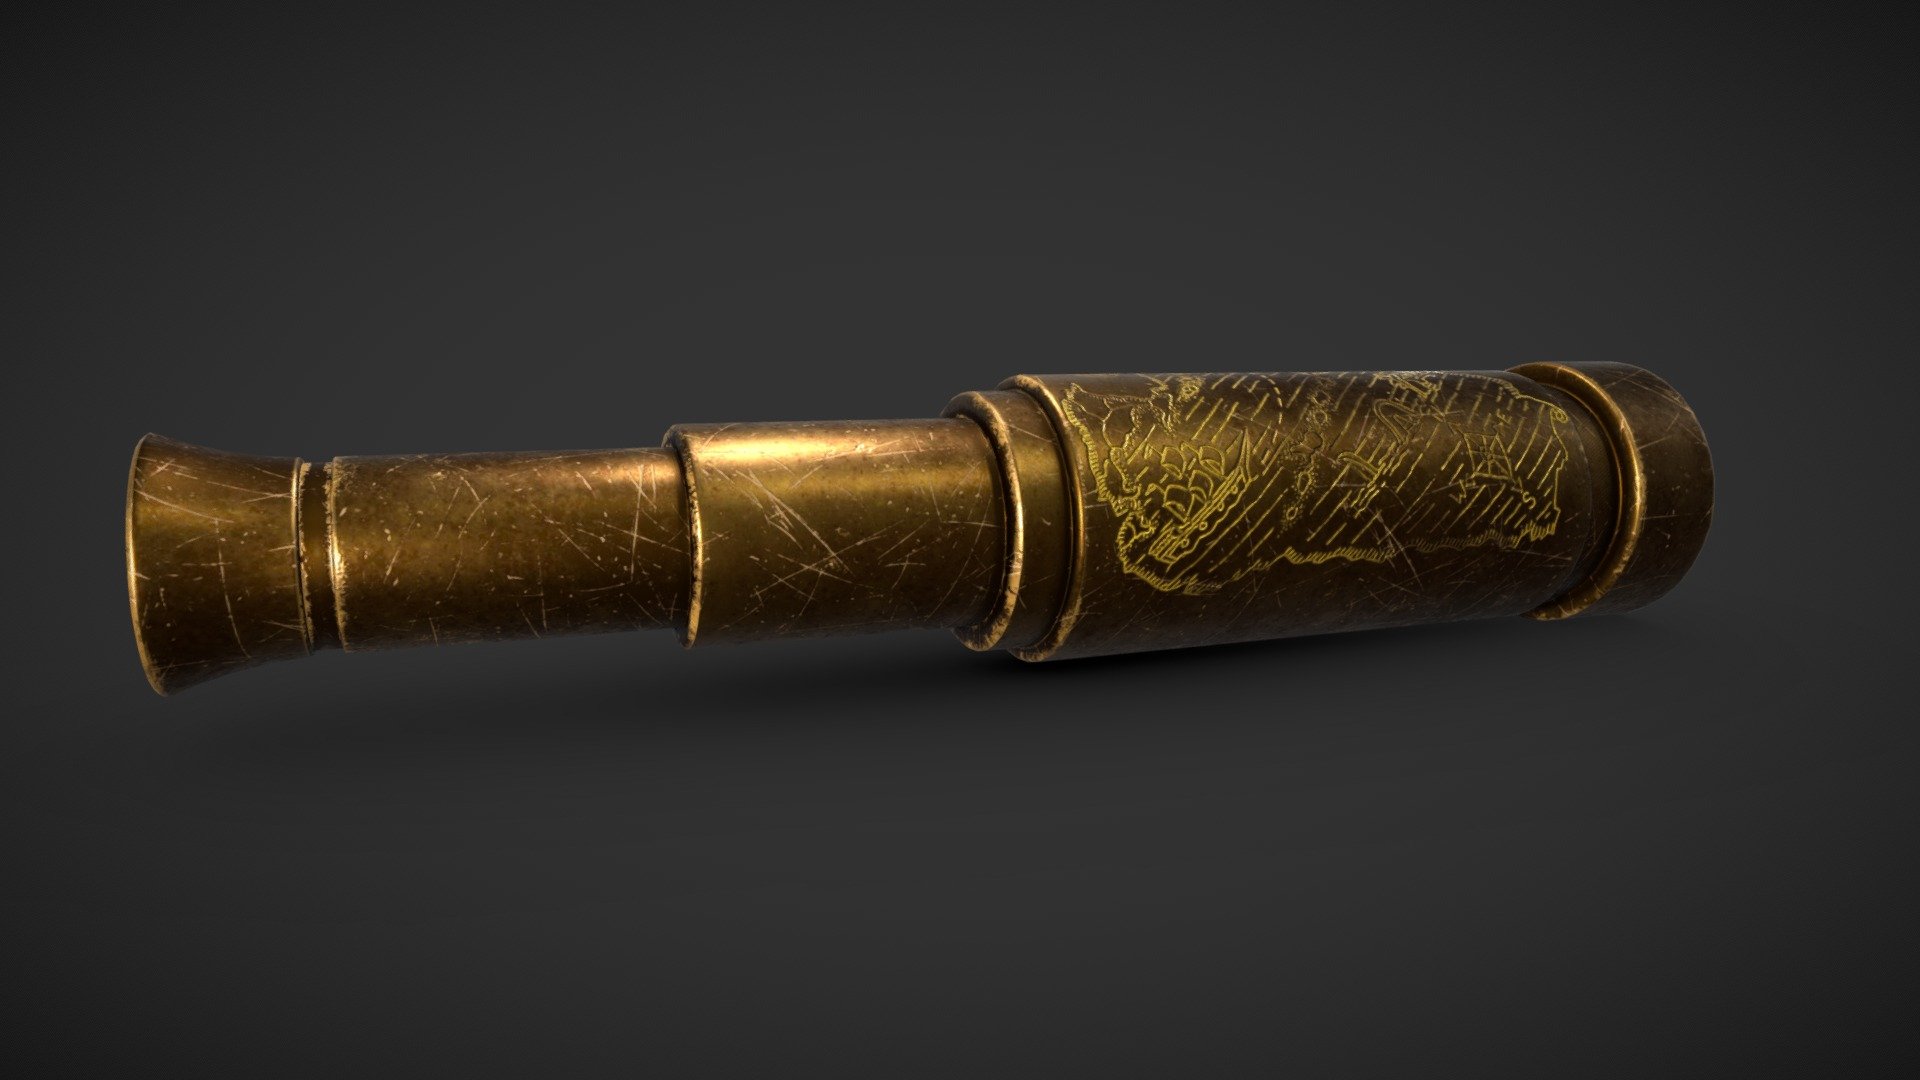 To get a treasure you have to see the treasure so here is a pirate spyglass 3d model